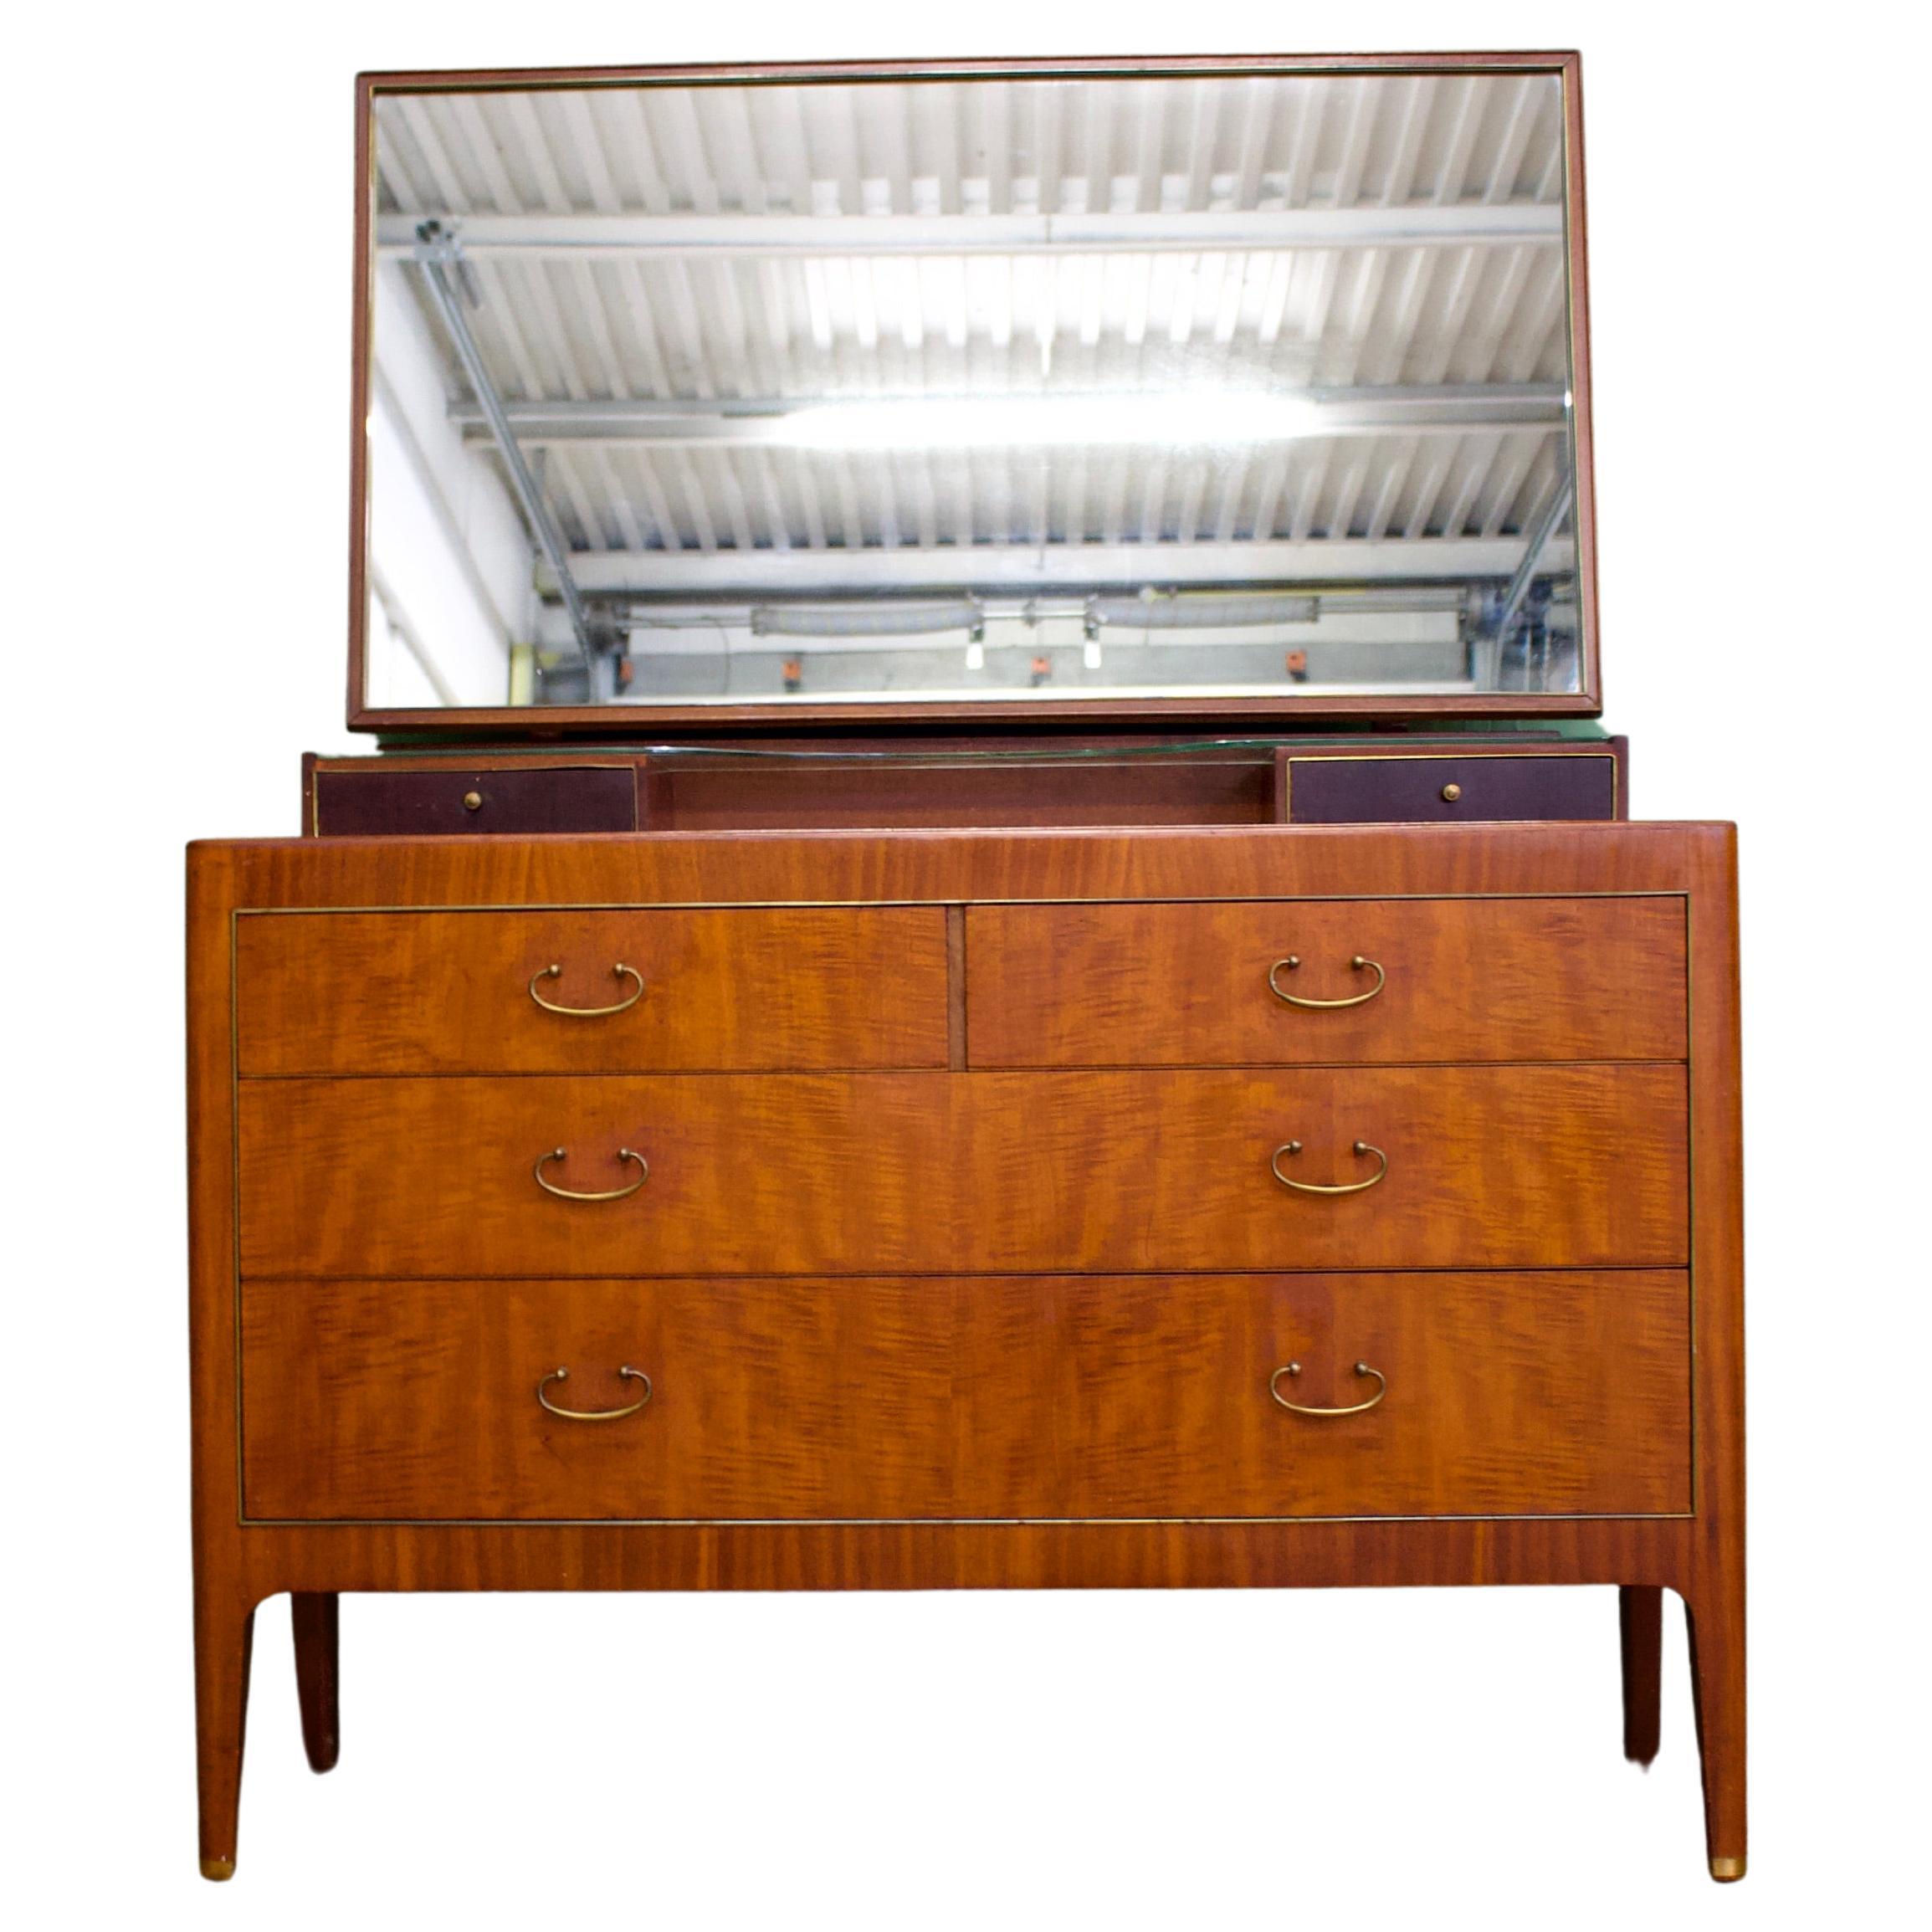 Midcentury Mahogany Dressing Chest by Greaves and Thomas, 1950s For Sale